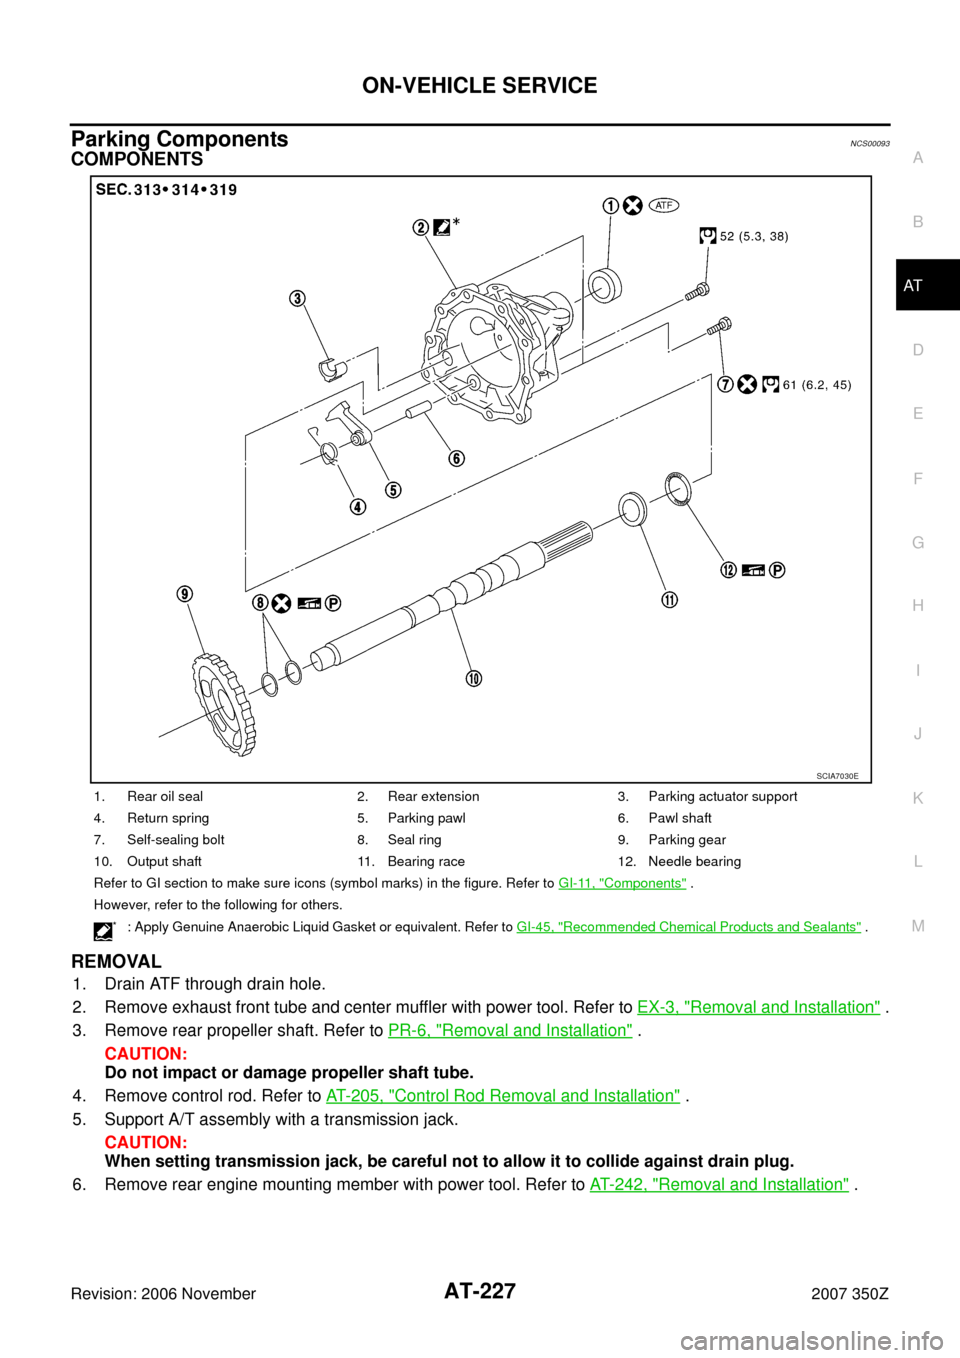 NISSAN 350Z 2007 Z33 Automatic Transmission User Guide ON-VEHICLE SERVICE
AT-227
D
E
F
G
H
I
J
K
L
MA
B
AT
Revision: 2006 November2007 350Z
Parking ComponentsNCS00093
COMPONENTS
REMOVAL
1. Drain ATF through drain hole.
2. Remove exhaust front tube and cen